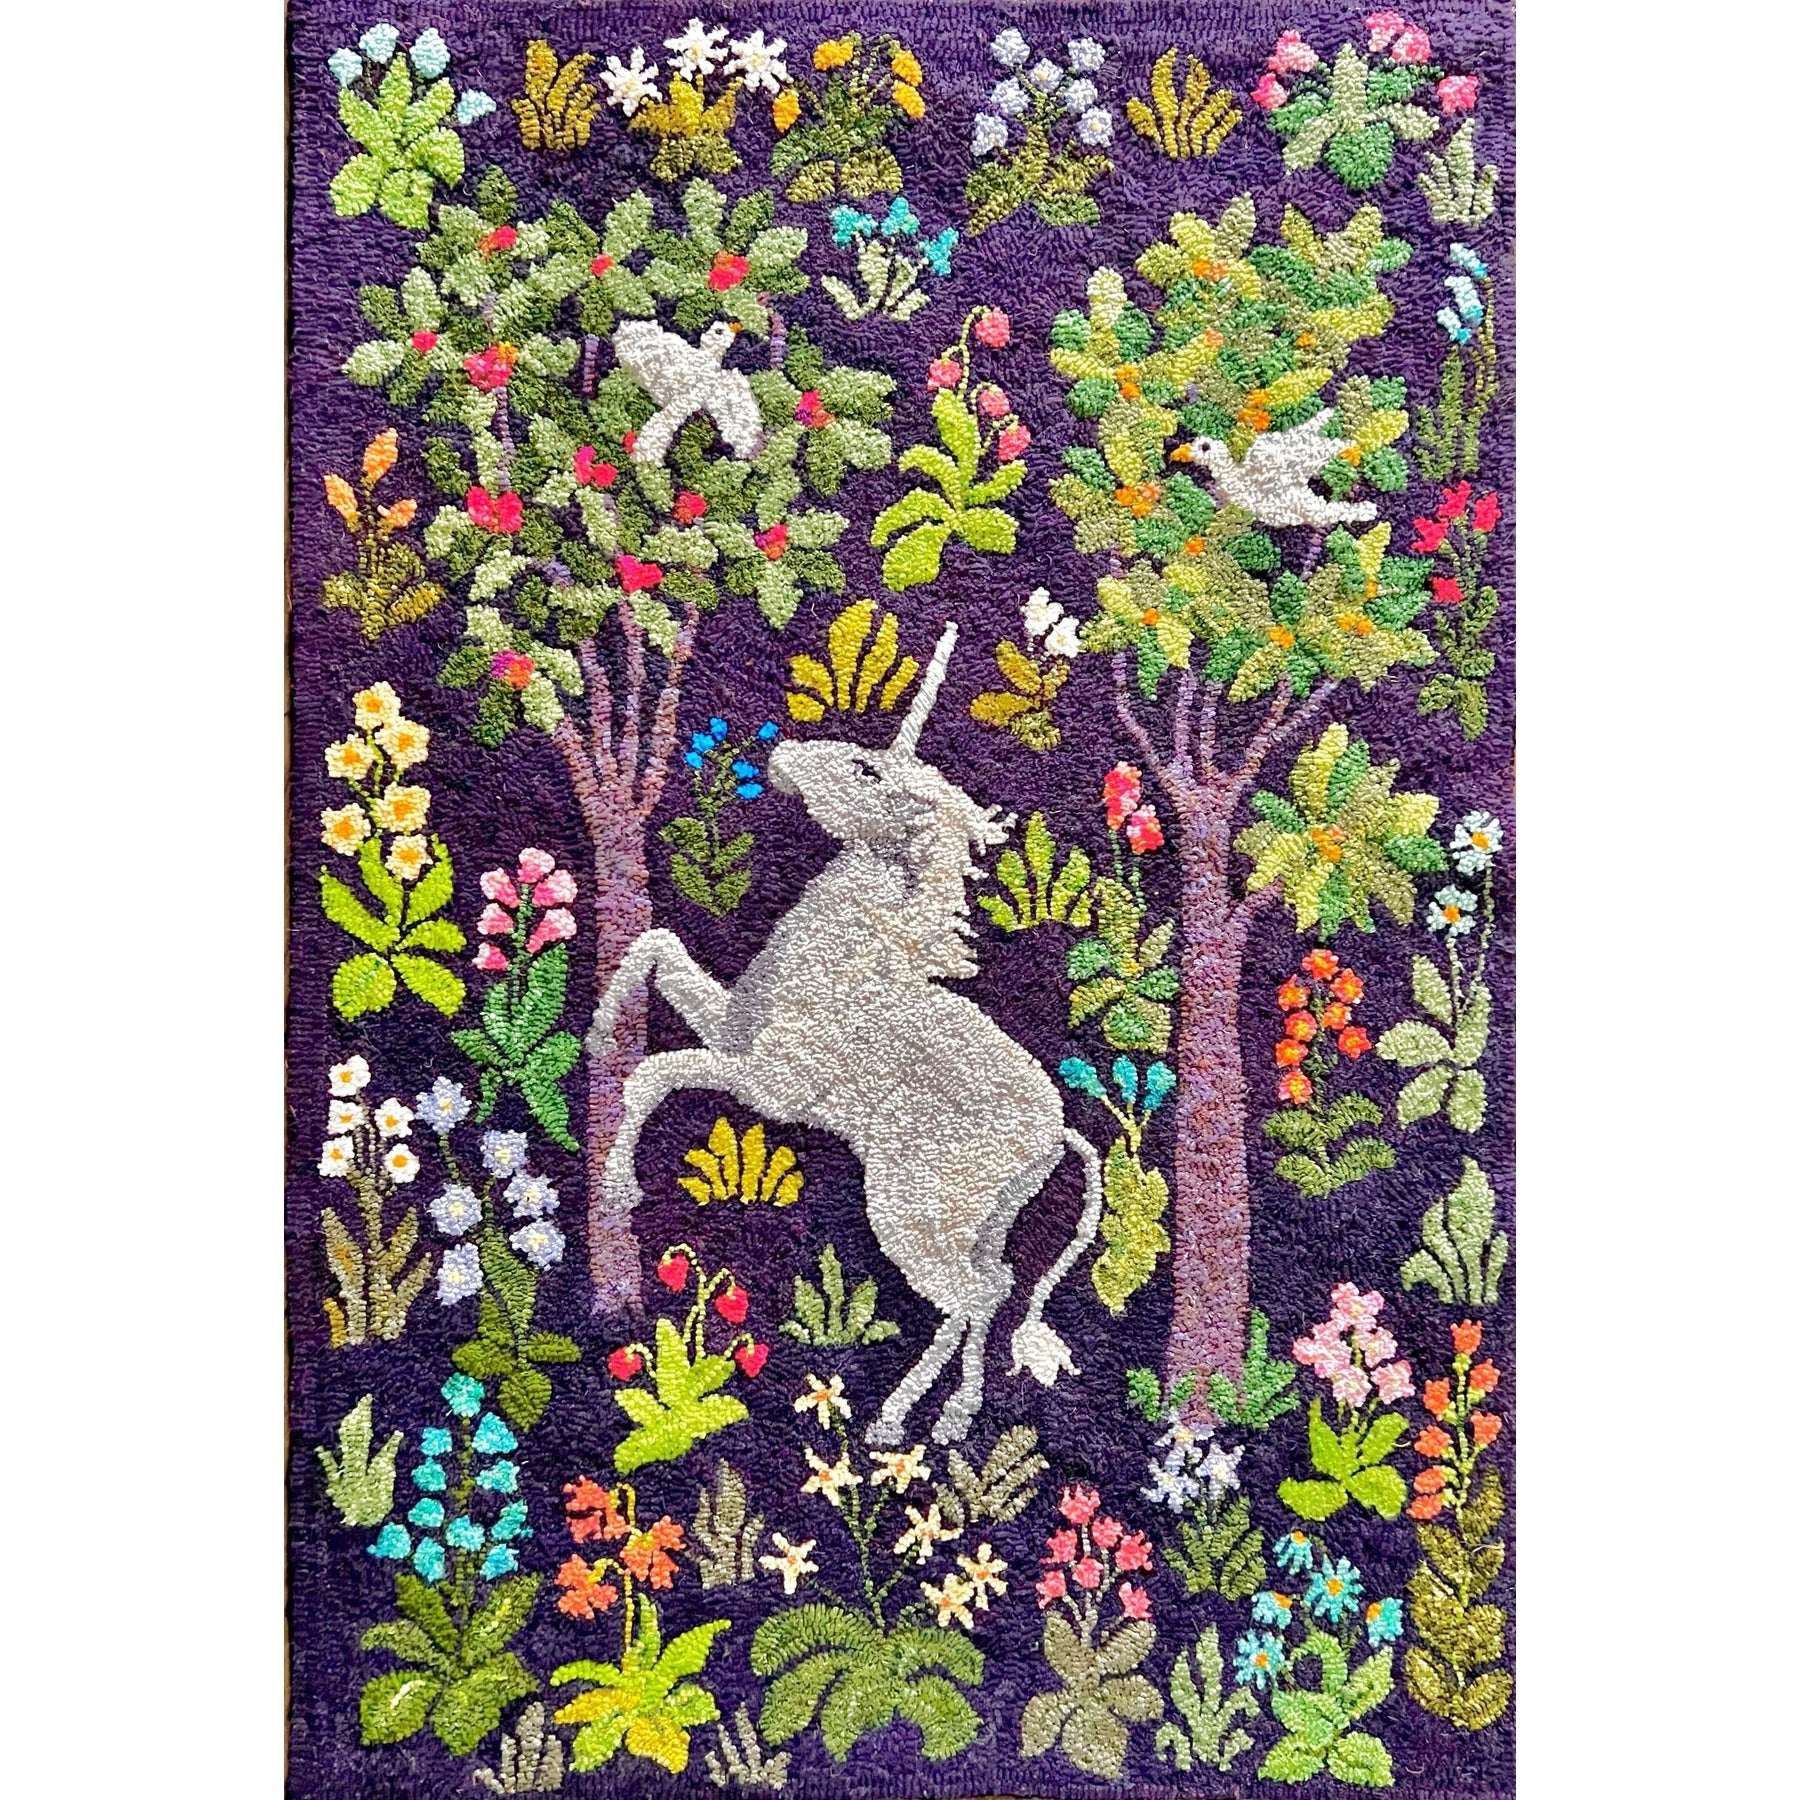 Unicorn Tapestry, rug hooked by Kathy Cowart